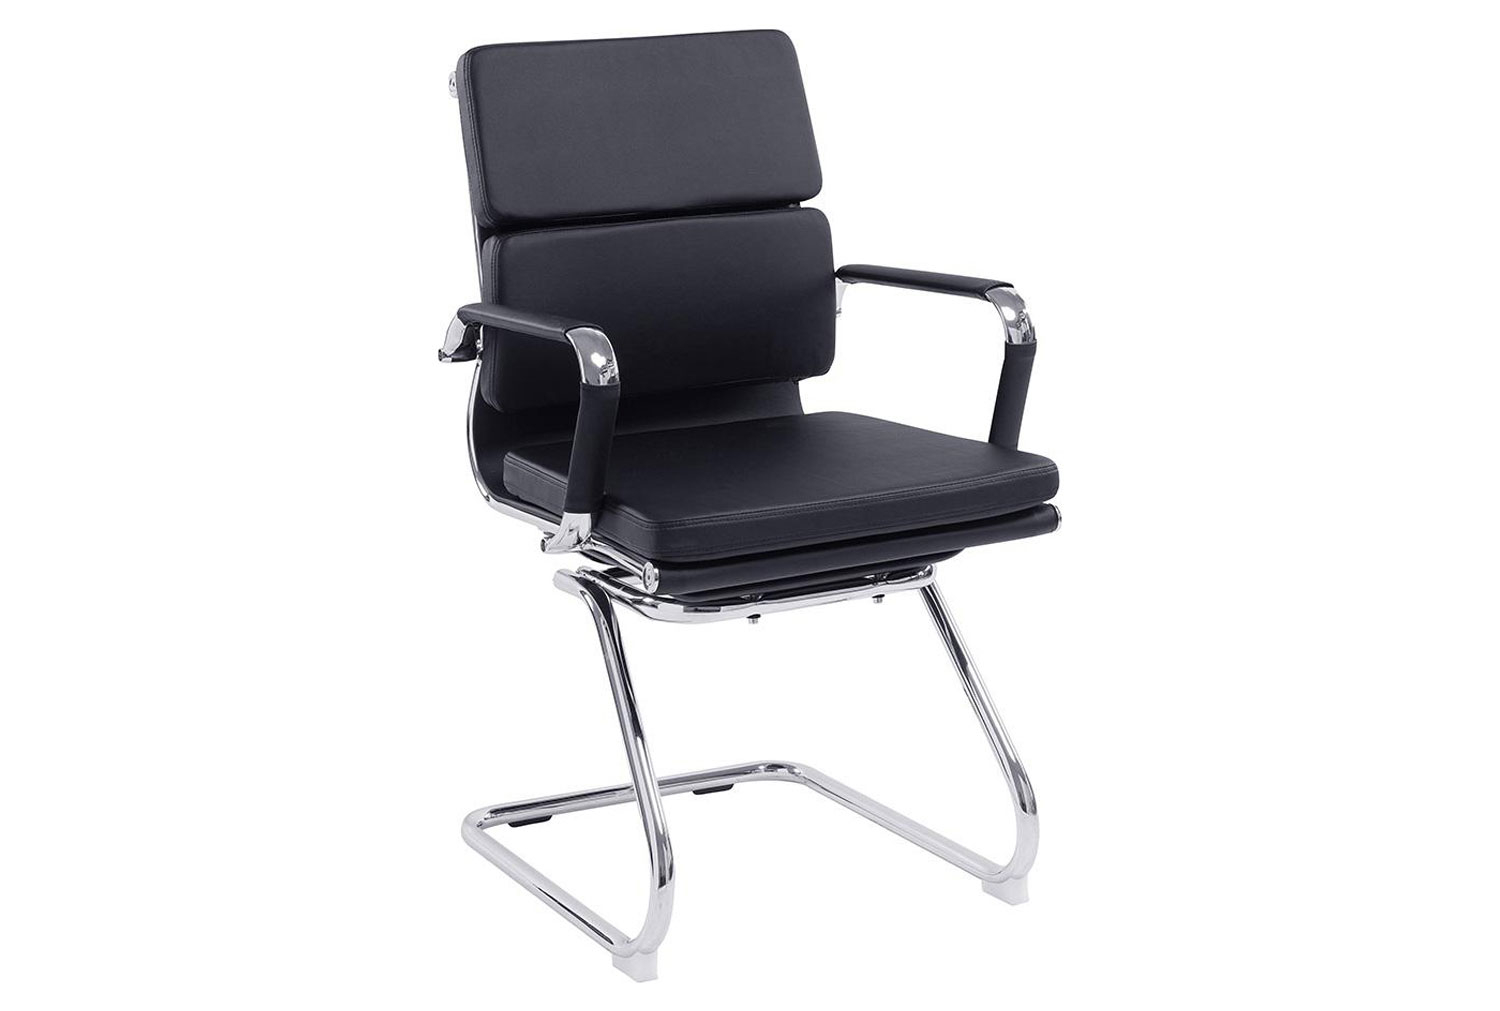 Dole Bonded Leather Visitor Office Chair, Black, Fully Installed